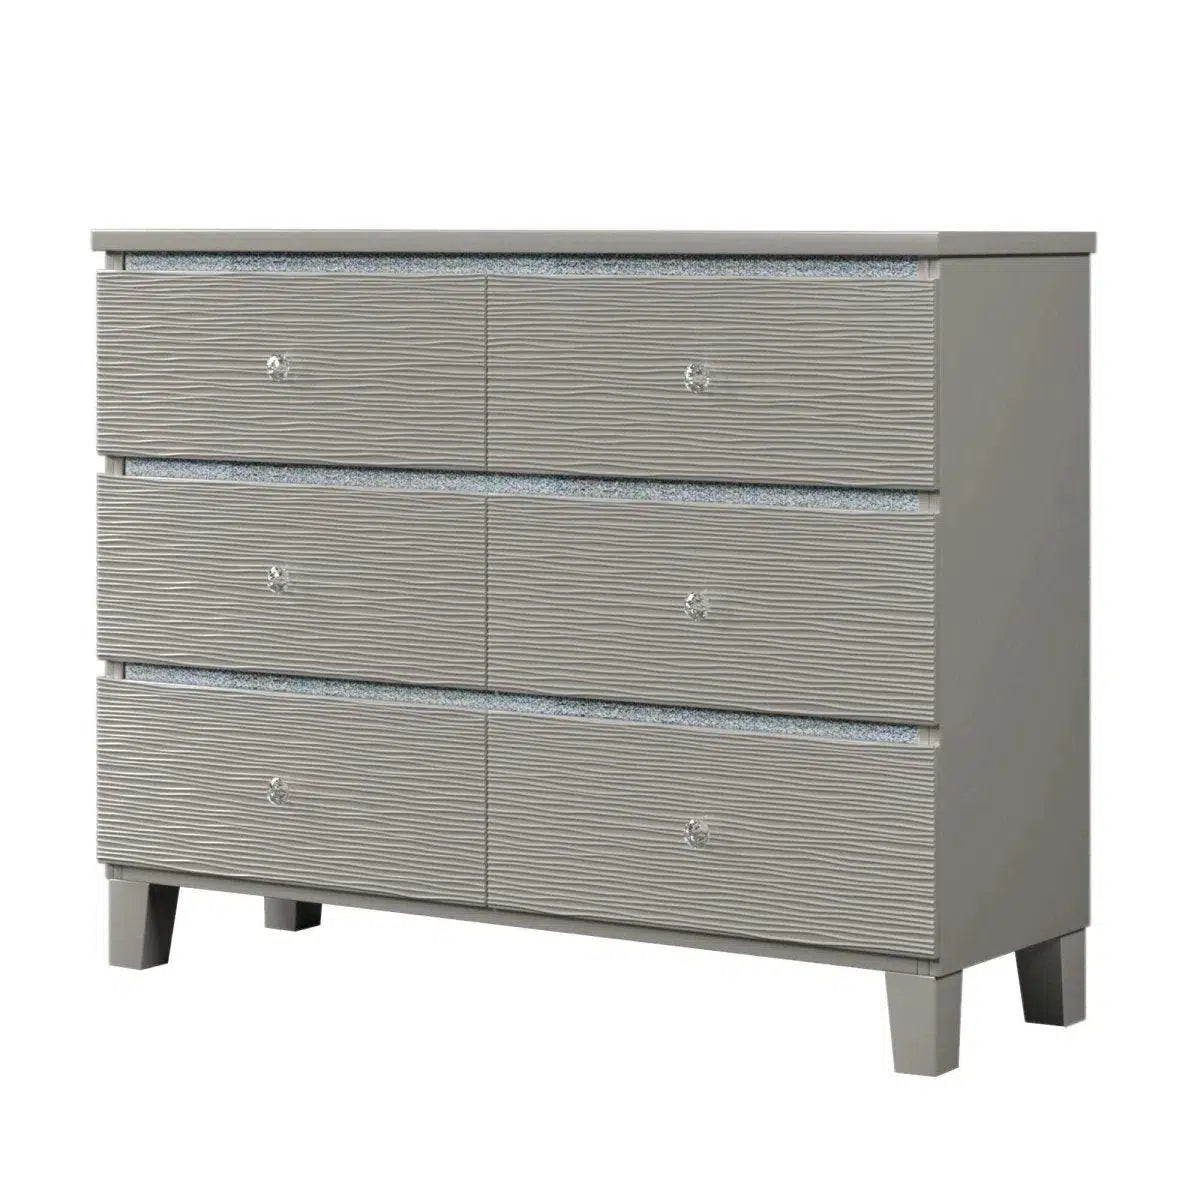 Champagne Silver Rubber Wood Dresser with 6 Drawers Metal Slides Crystal Handle Home Decor by Design